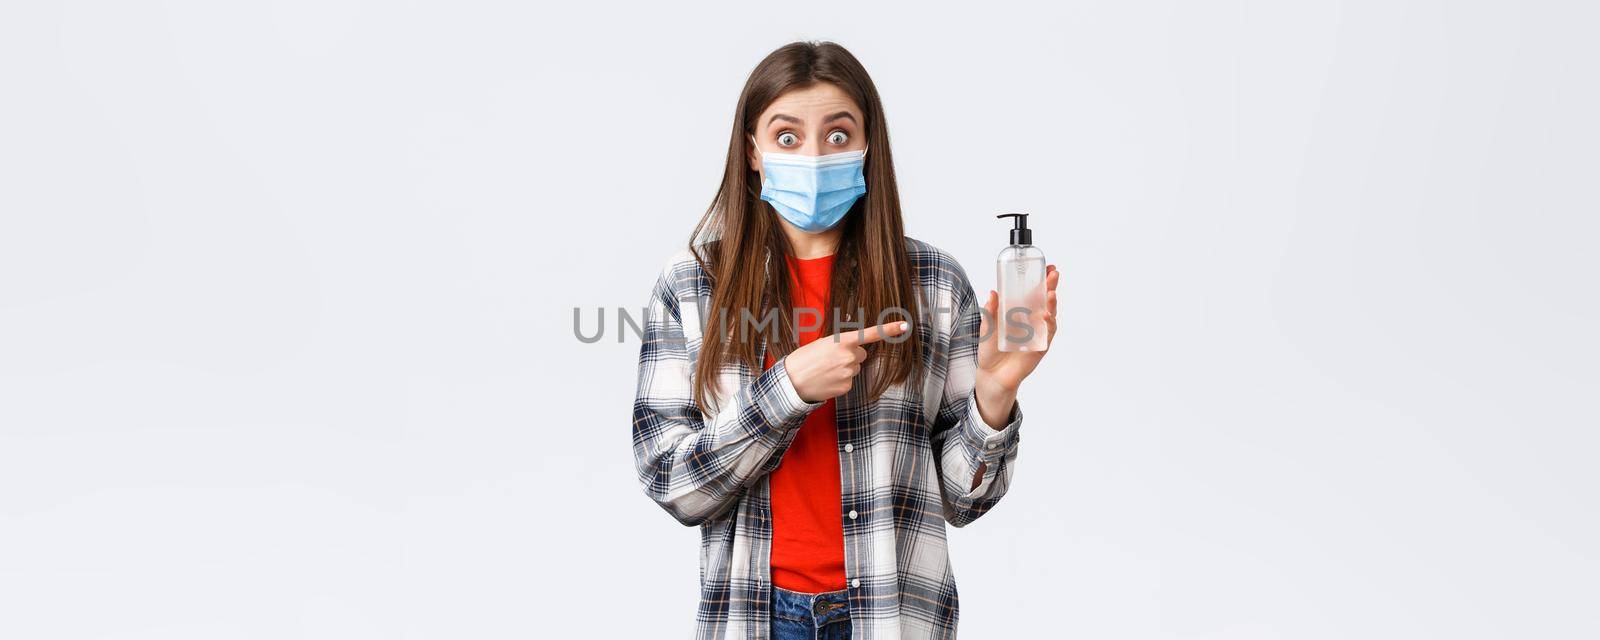 Coronavirus outbreak, leisure on quarantine, social distancing and emotions concept. Excited and astonished young woman in medical mask, pointing at hand sanitizer, recommend product.